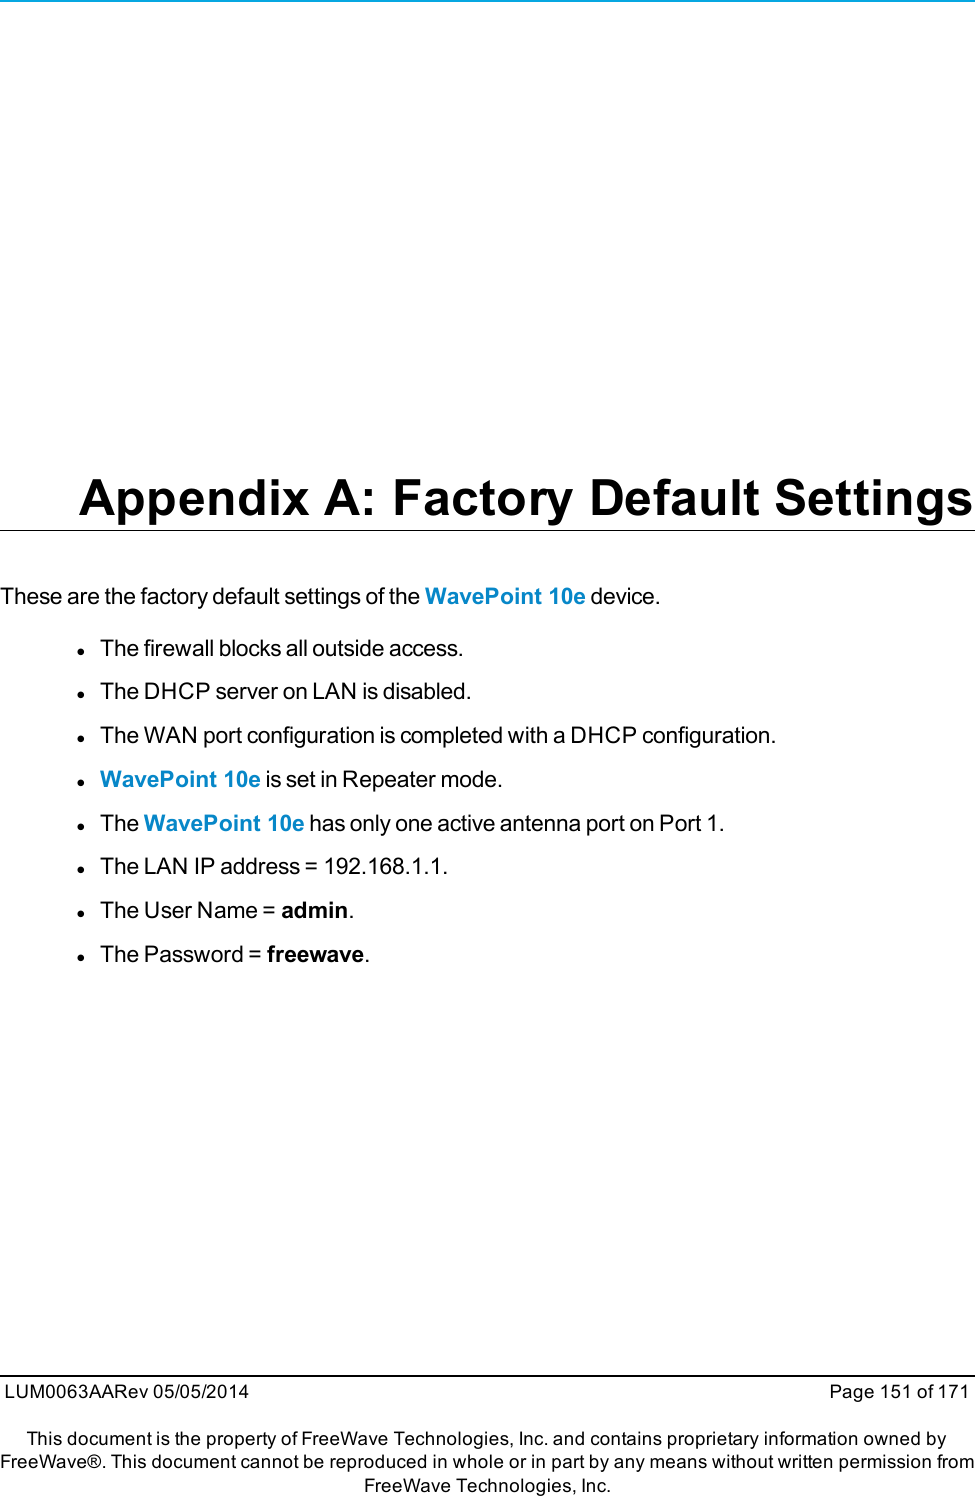 Appendix A: Factory Default SettingsThese are the factory default settings of the WavePoint 10e device.lThe firewall blocks all outside access.lThe DHCP server on LAN is disabled.lThe WAN port configuration is completed with a DHCP configuration.lWavePoint 10e is set in Repeater mode.lThe WavePoint 10e has only one active antenna port on Port 1.lThe LAN IP address = 192.168.1.1.lThe User Name = admin.lThe Password = freewave.LUM0063AARev 05/05/2014 Page 151 of 171This document is the property of FreeWave Technologies, Inc. and contains proprietary information owned byFreeWave®. This document cannot be reproduced in whole or in part by any means without written permission fromFreeWave Technologies, Inc.